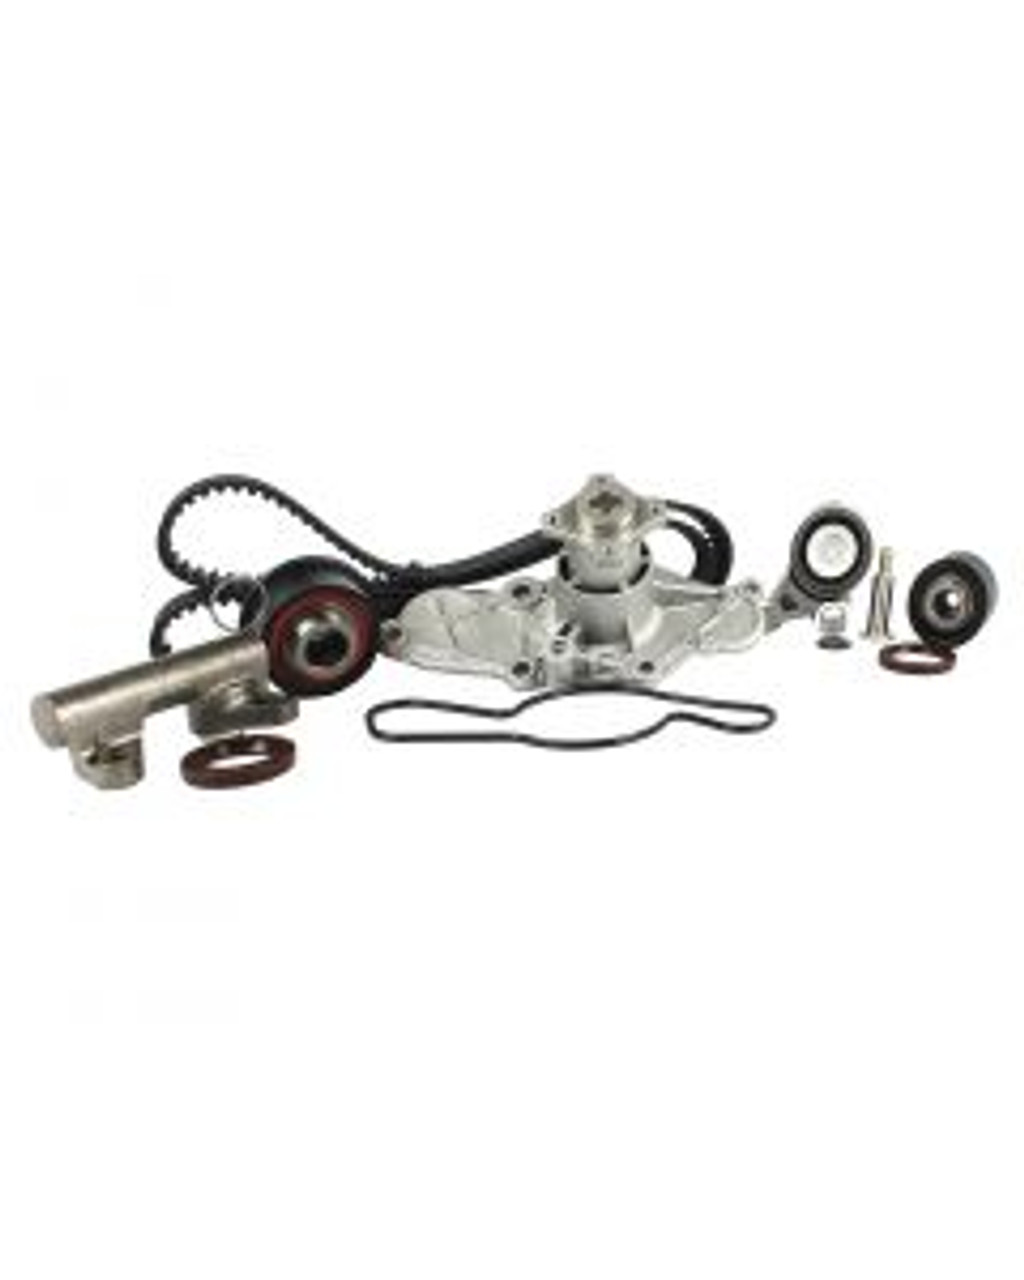 Timing Belt Kit with Water Pump 2.5L 2000 Mazda 626 - TBK455WP.11